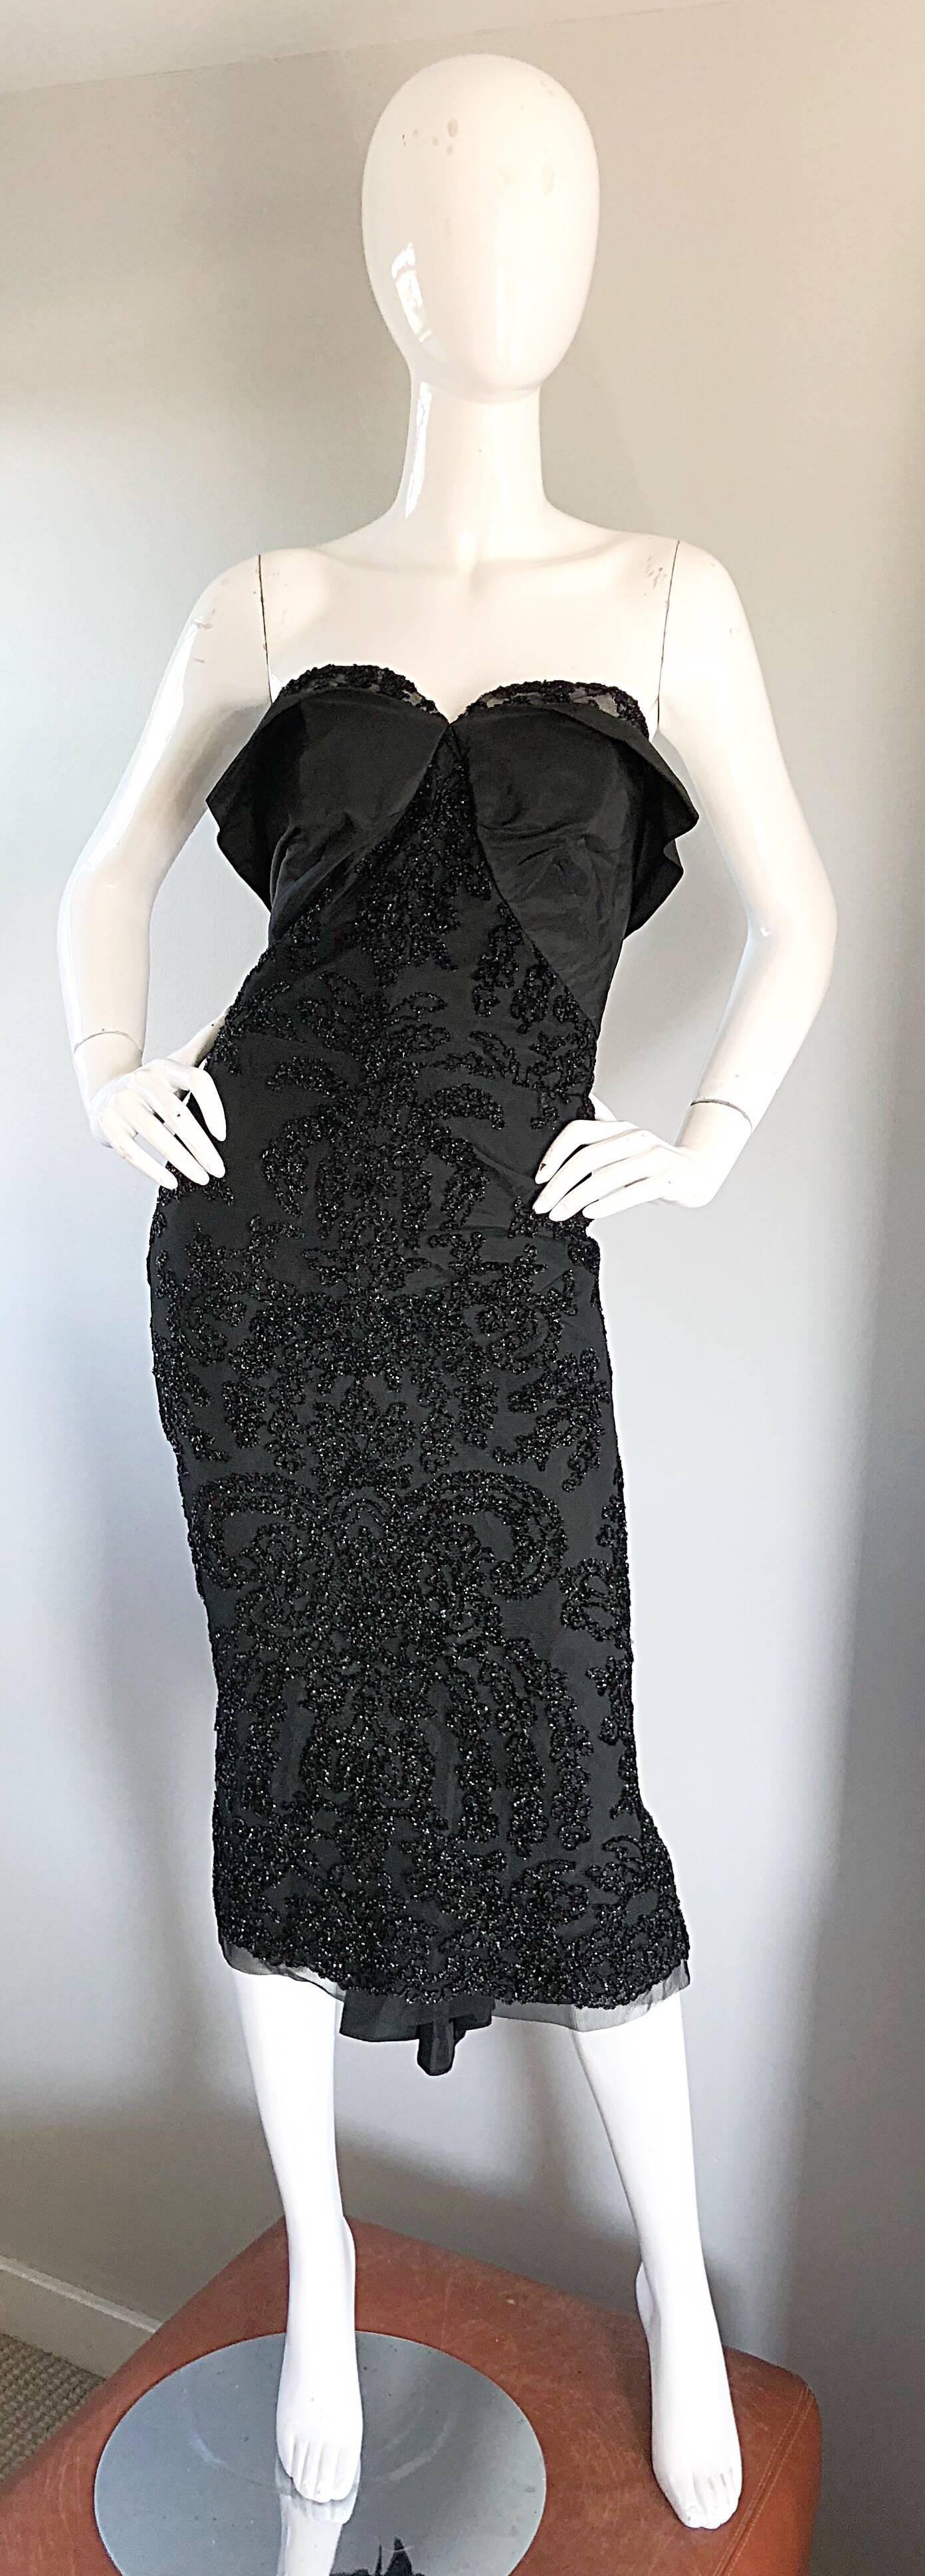 Stunning 1950s vintage couture black silk metallic strapless wiggle dress, with taffeta train! Bombshell sexy 50s starlet silhouette! 
Features a taffeta boned shelf bodice with lace peeking above the bust. Figure hugging bodice is beyond